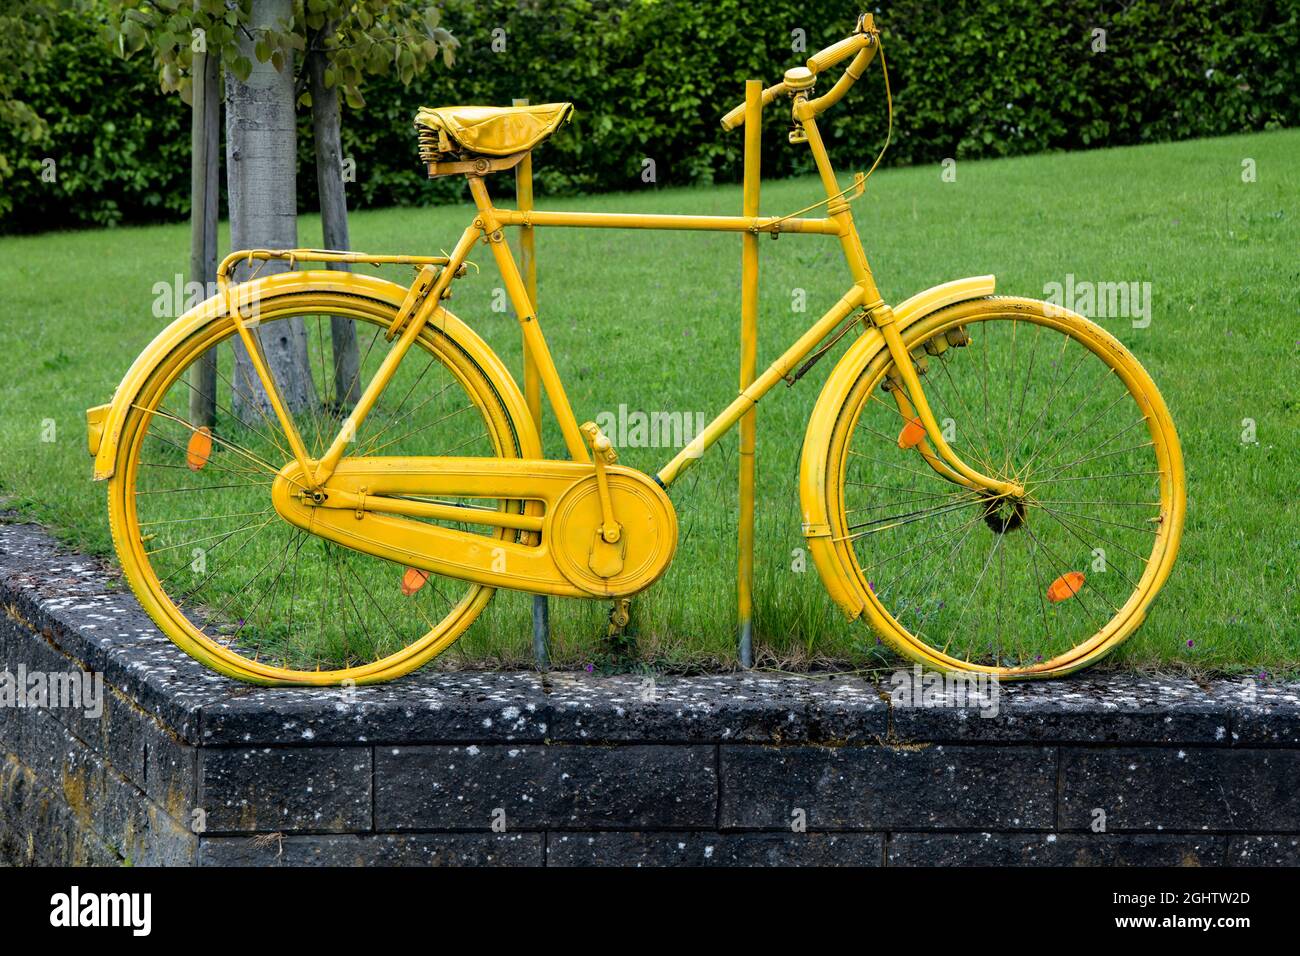 Closeup on a yellow bicycle on a lawn Stock Photo